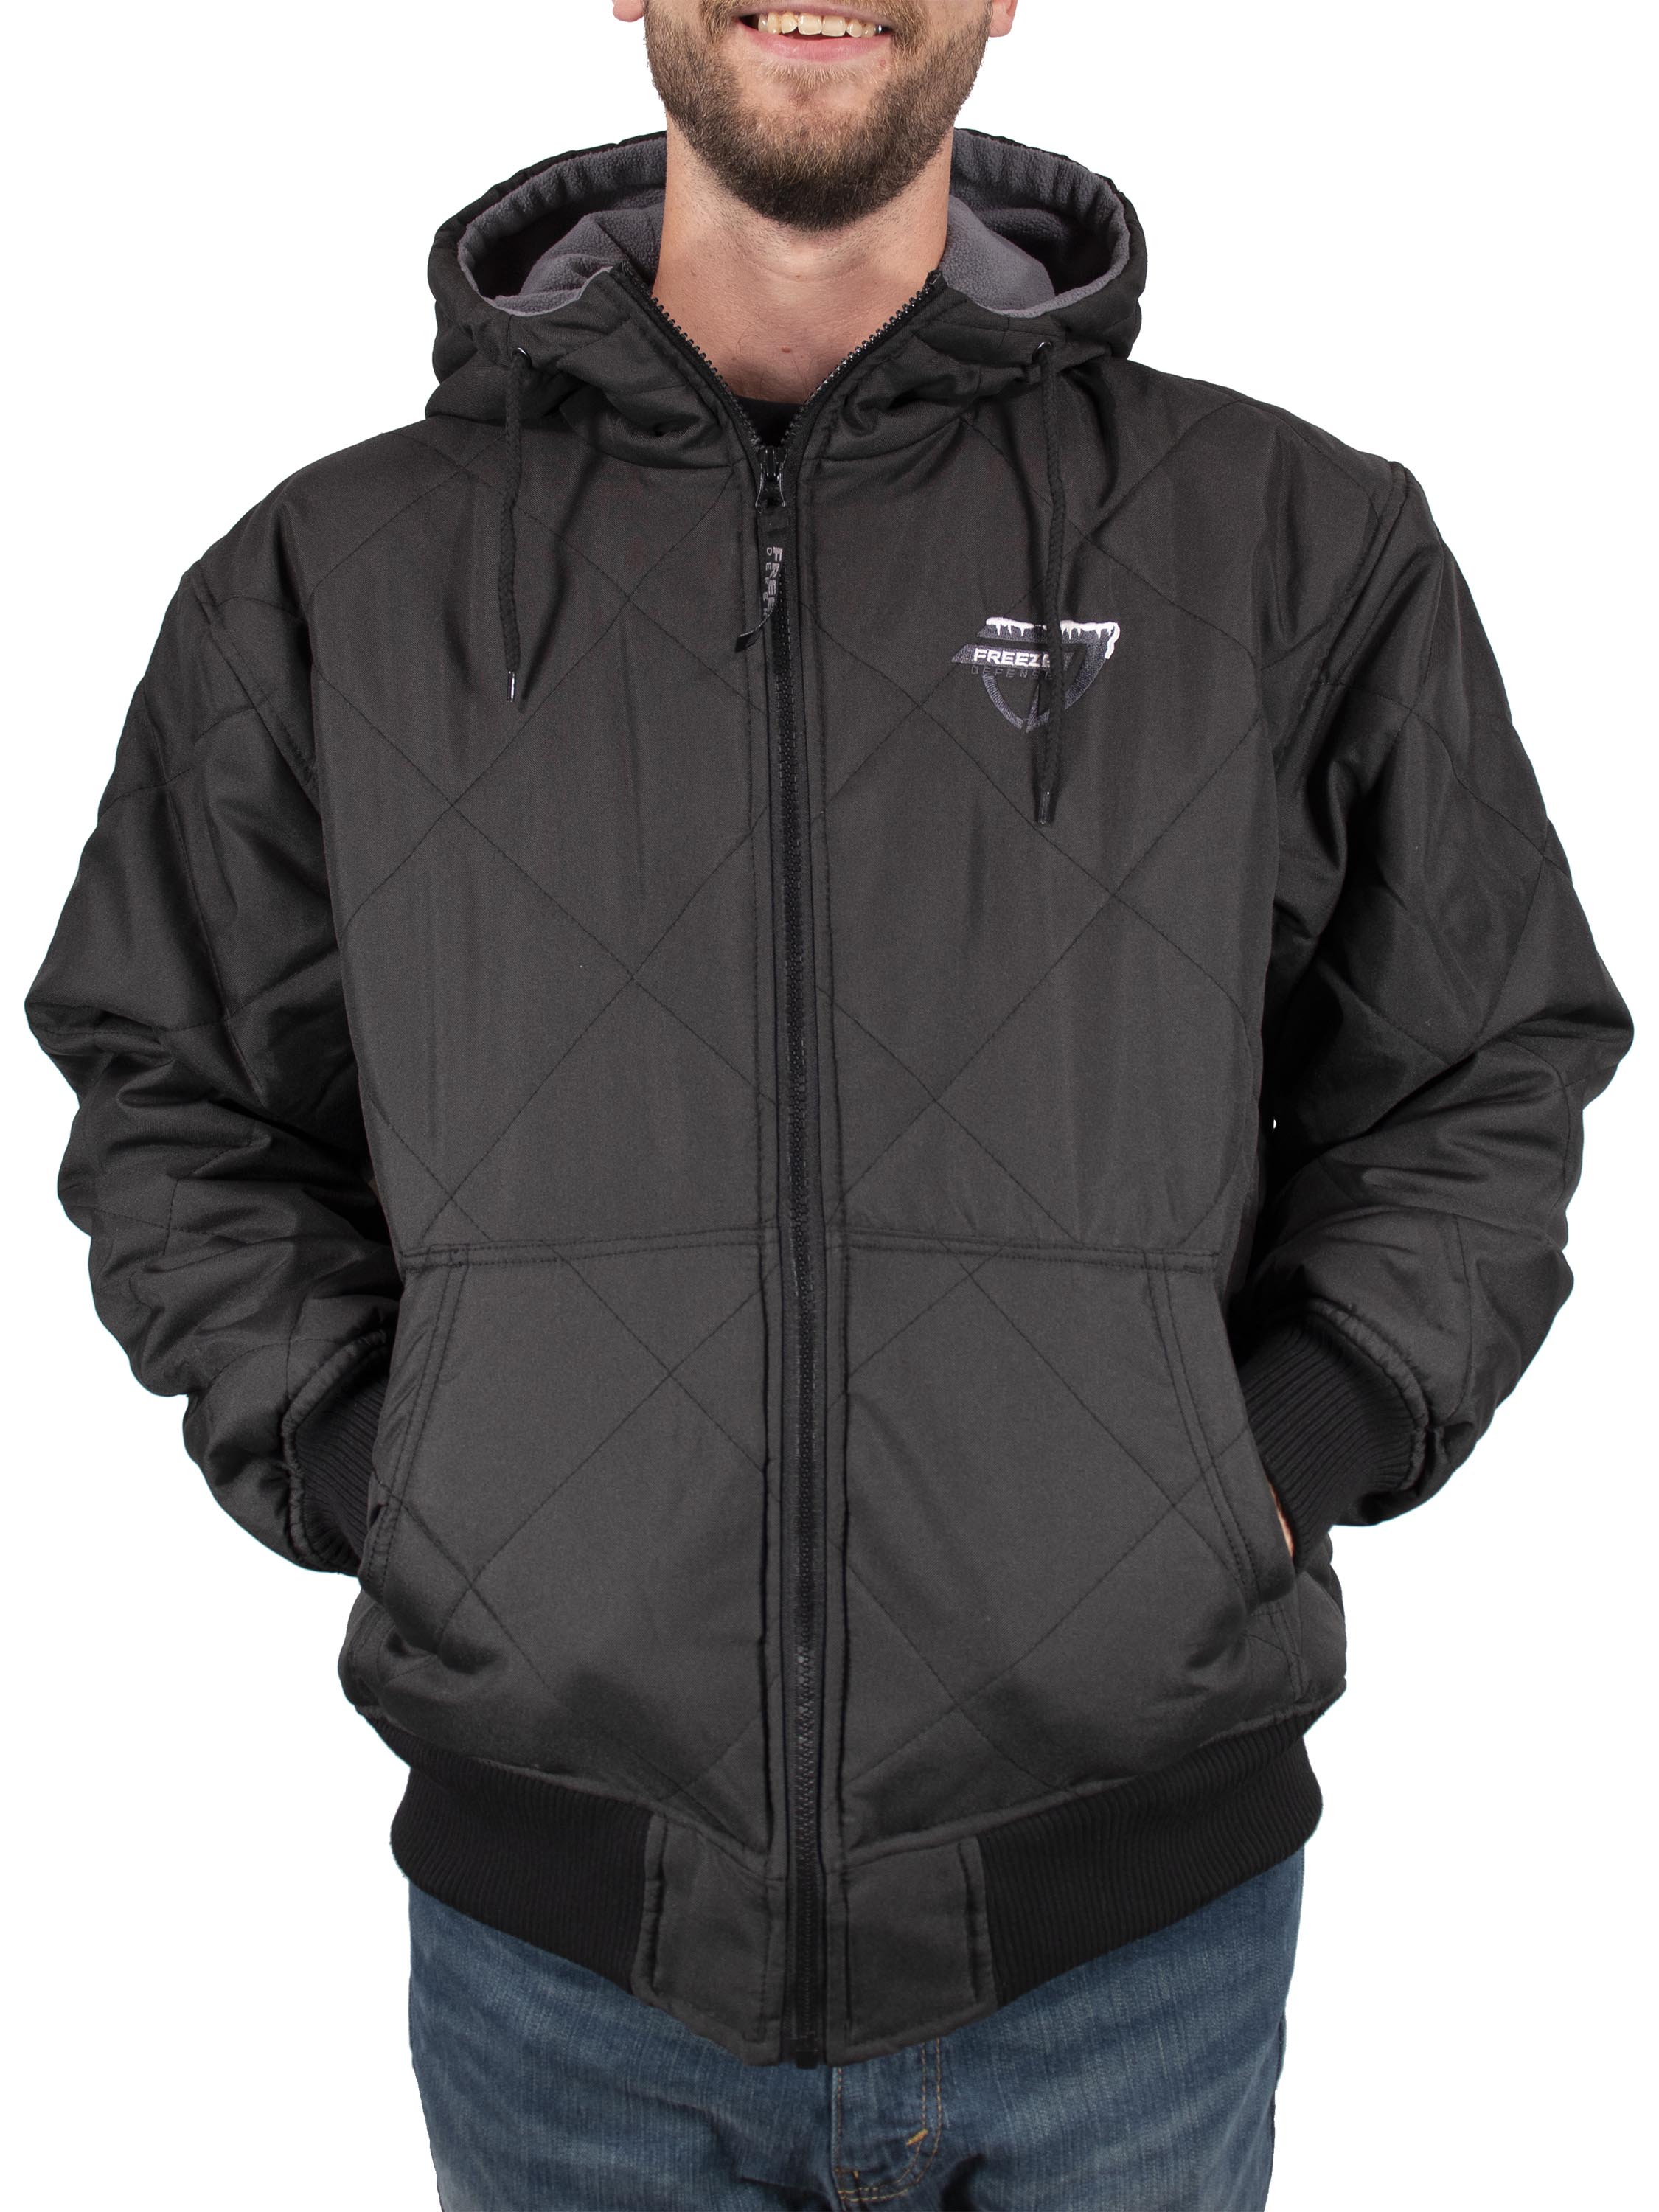 ARTFFEL Mens Plus Size Hooded Mutli-Zip Thermal Relaxed Fit Down Puffer Quilted Jacket Coat